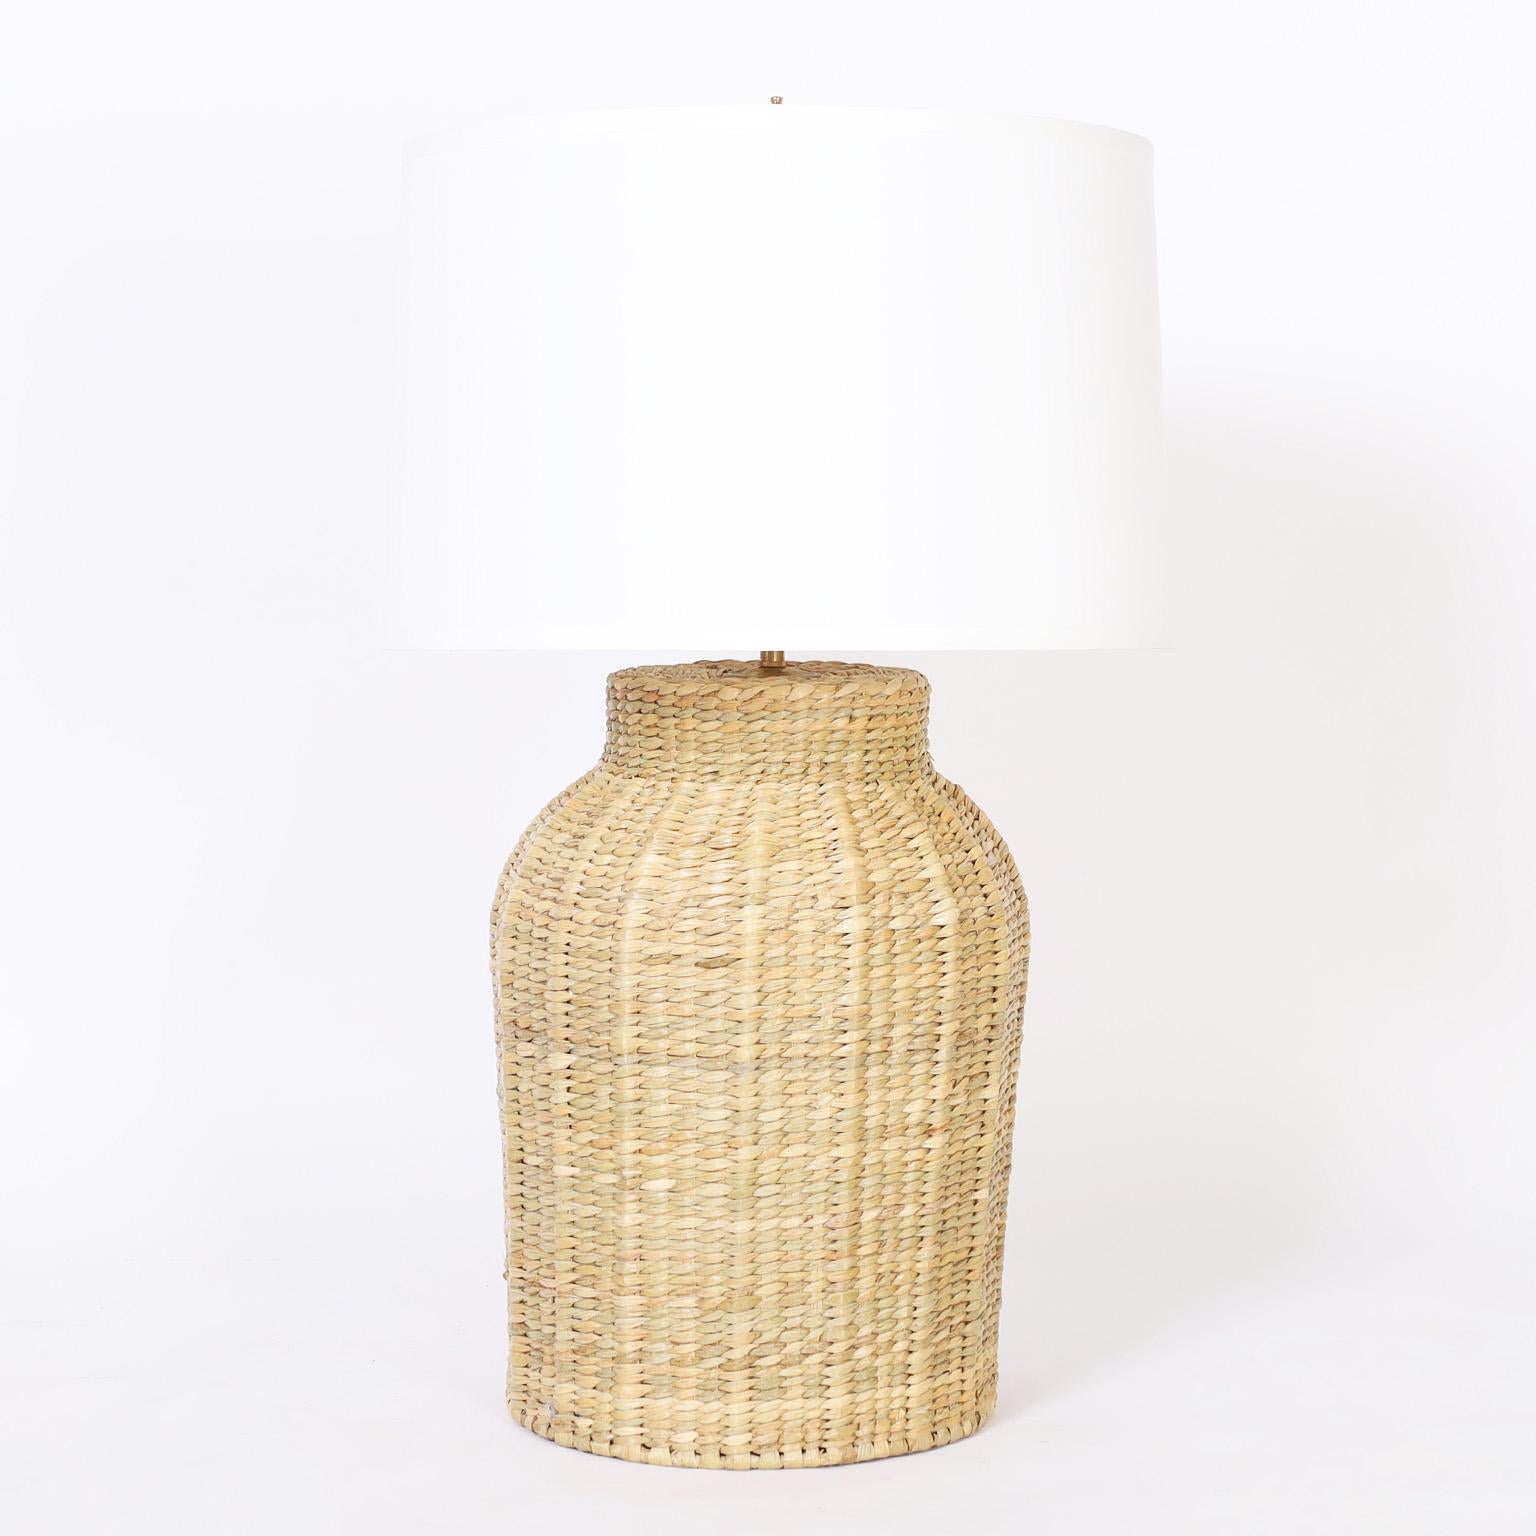 Asian modern style table lamps hand crafted in wicker or reed in a classic bottle form, in a bold scale from the FS Flores Collection designed and offered exclusively by F.S. Henemader Antiques.
 